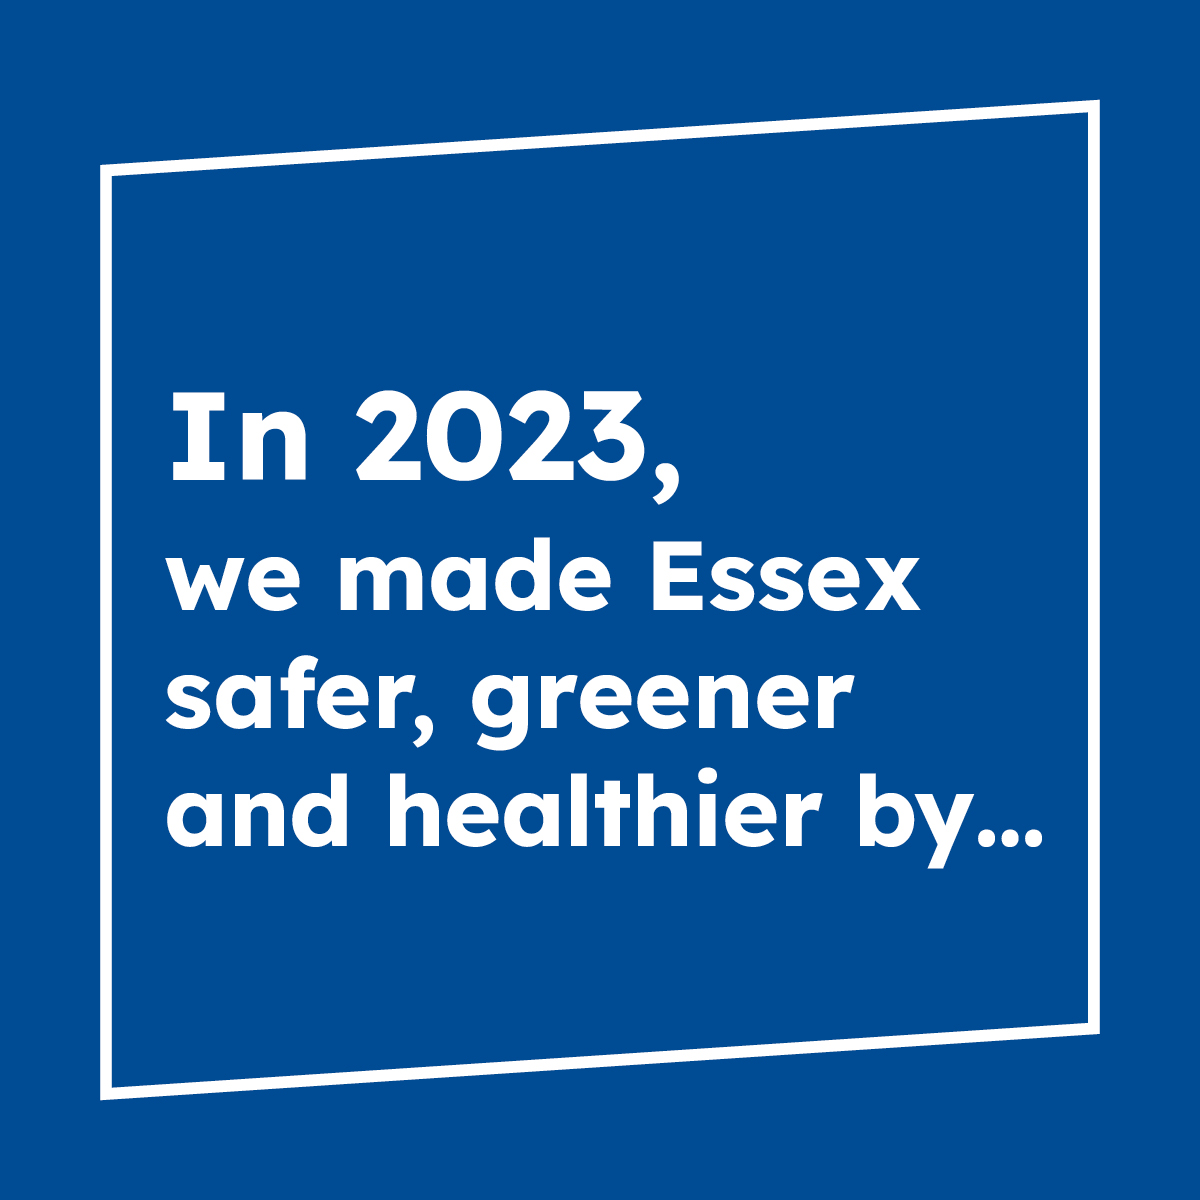 In 2023, we made Essex safer, greener and healthier by...